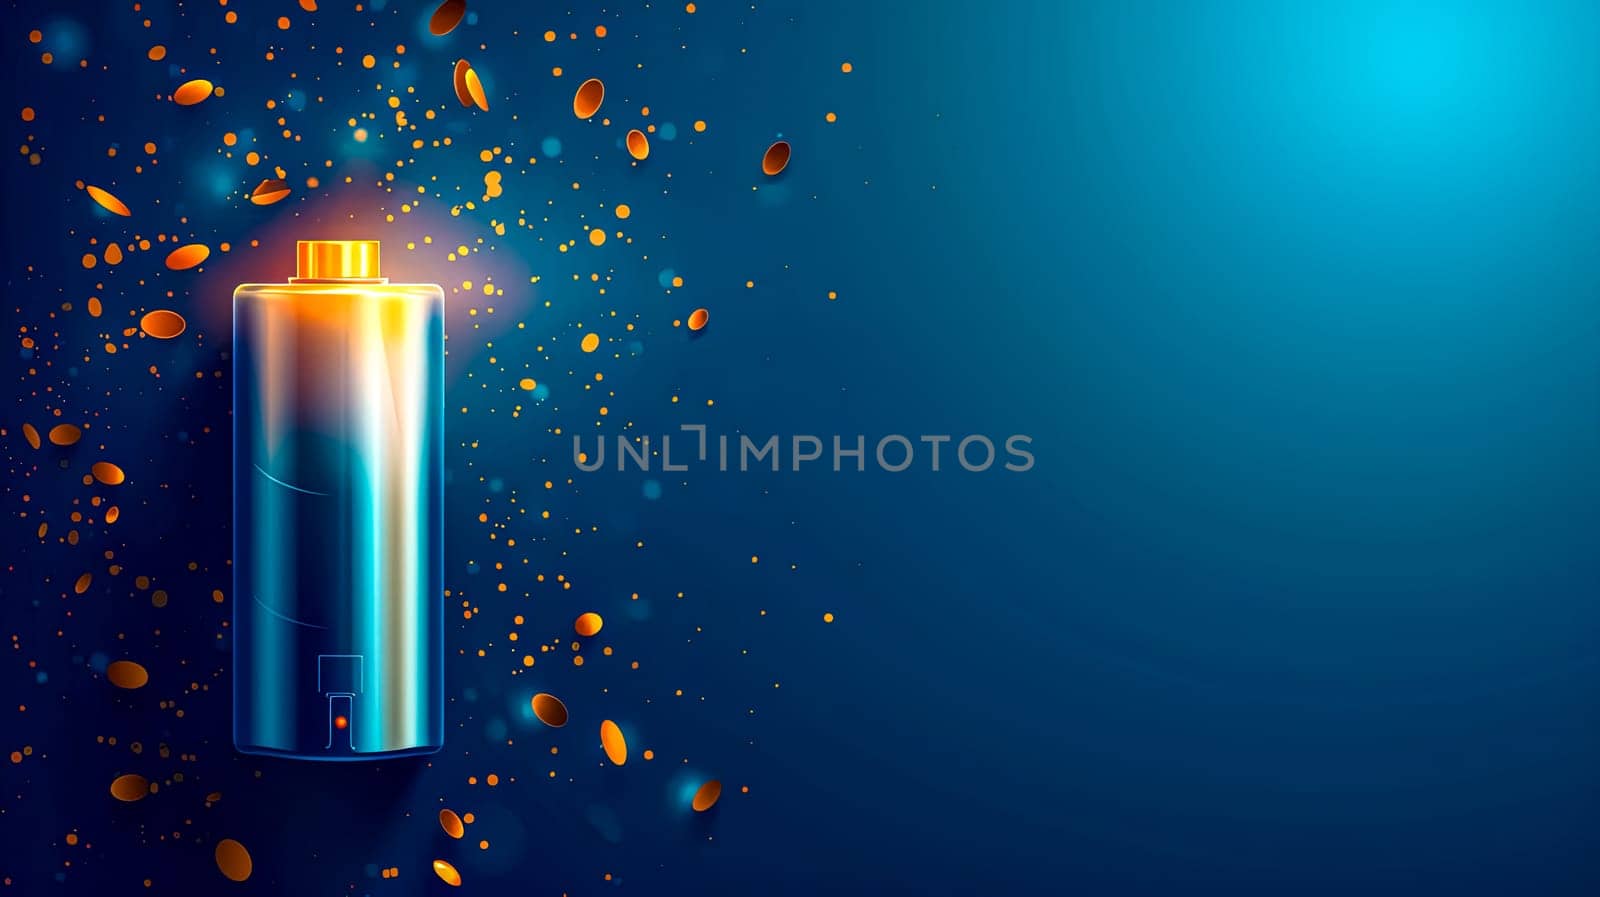 An electric blue battery is exploding with sparks on a blue background, creating a dramatic lighting effect reminiscent of a street light or candle in an atmospheric event